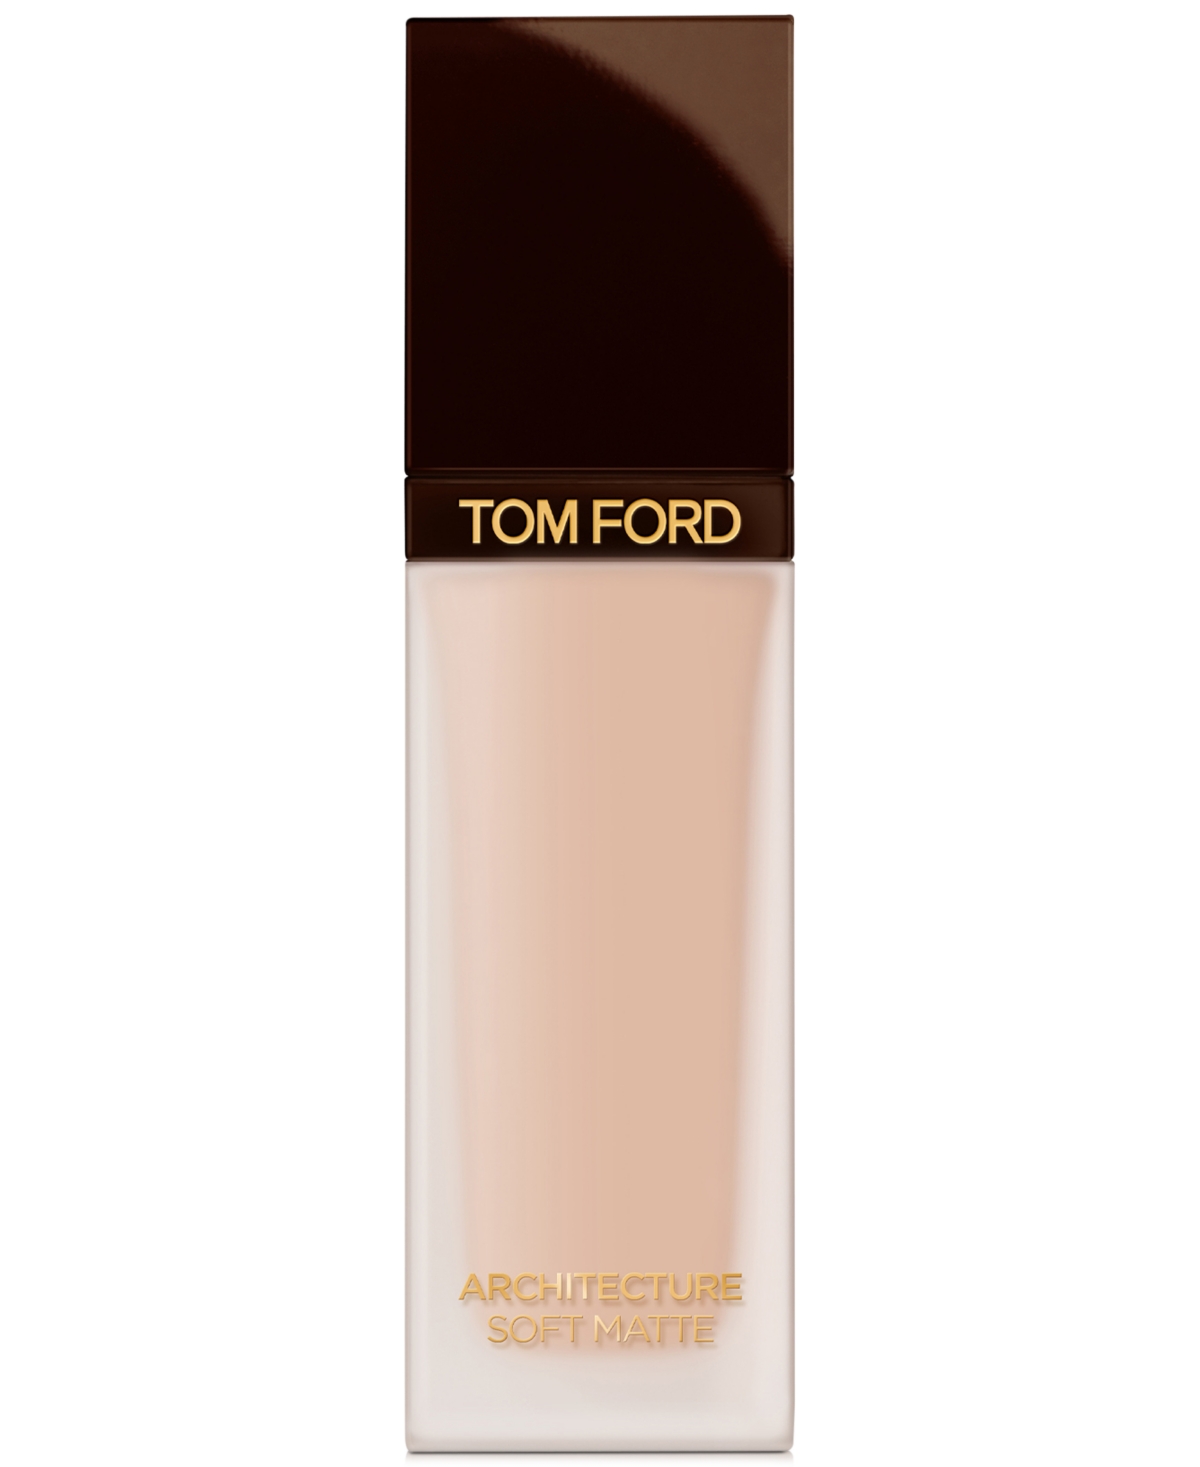 Shop Tom Ford Architecture Soft Matte Blurring Foundation In . Rose - Very Fair